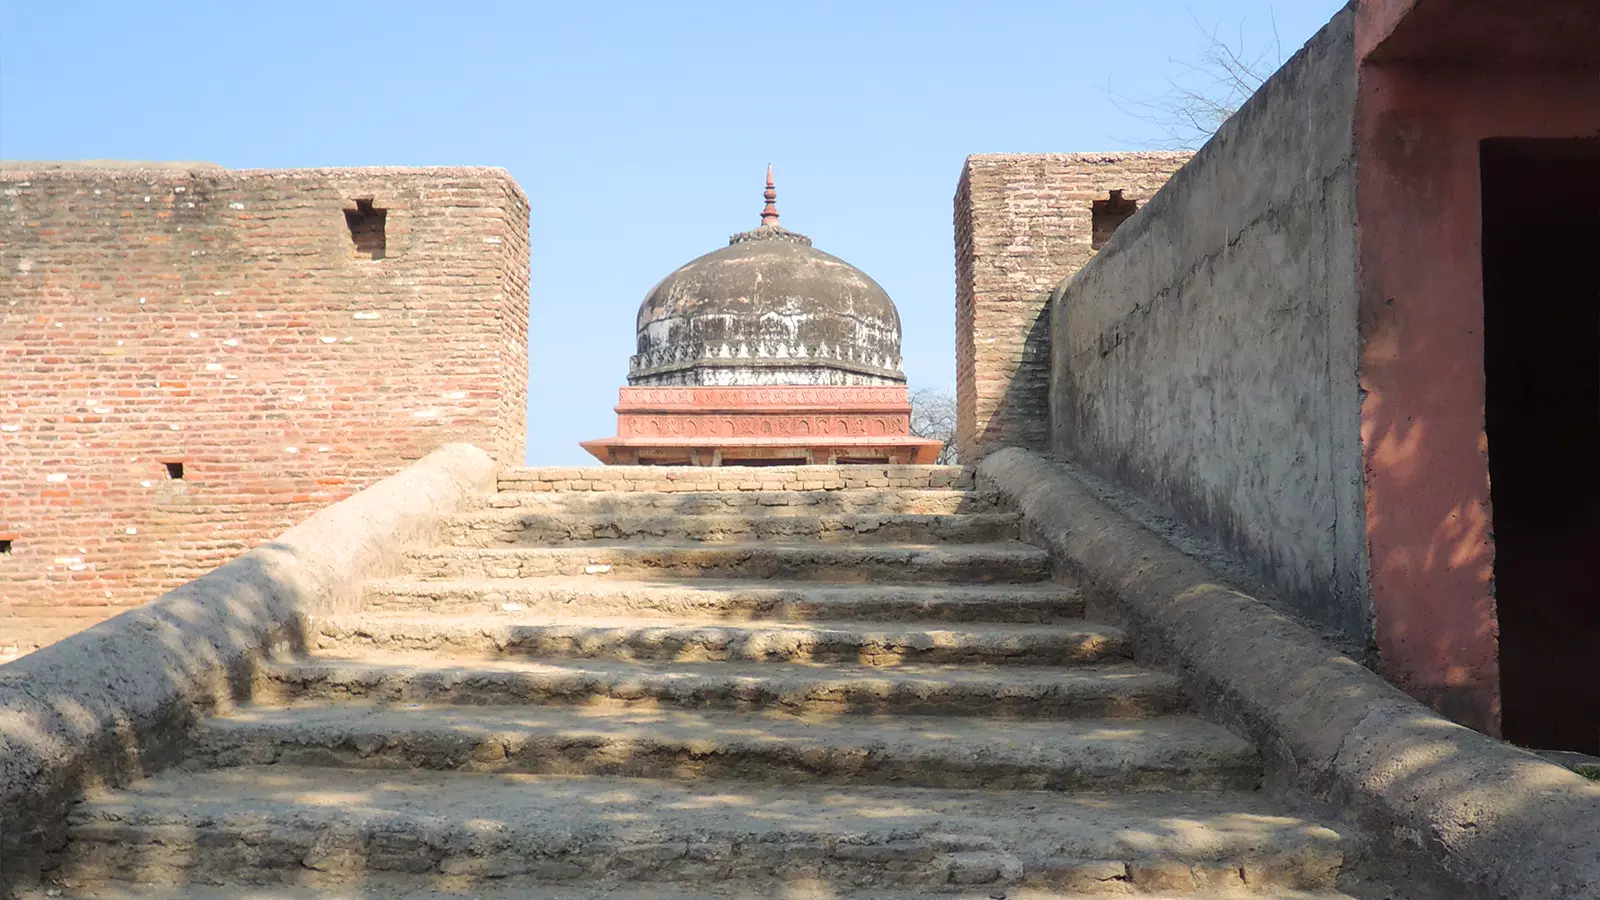 Lakshagraha is believed to be situated on top of a mound in the middle of fields at the confluence of the Hindon and Krishni rivers. 